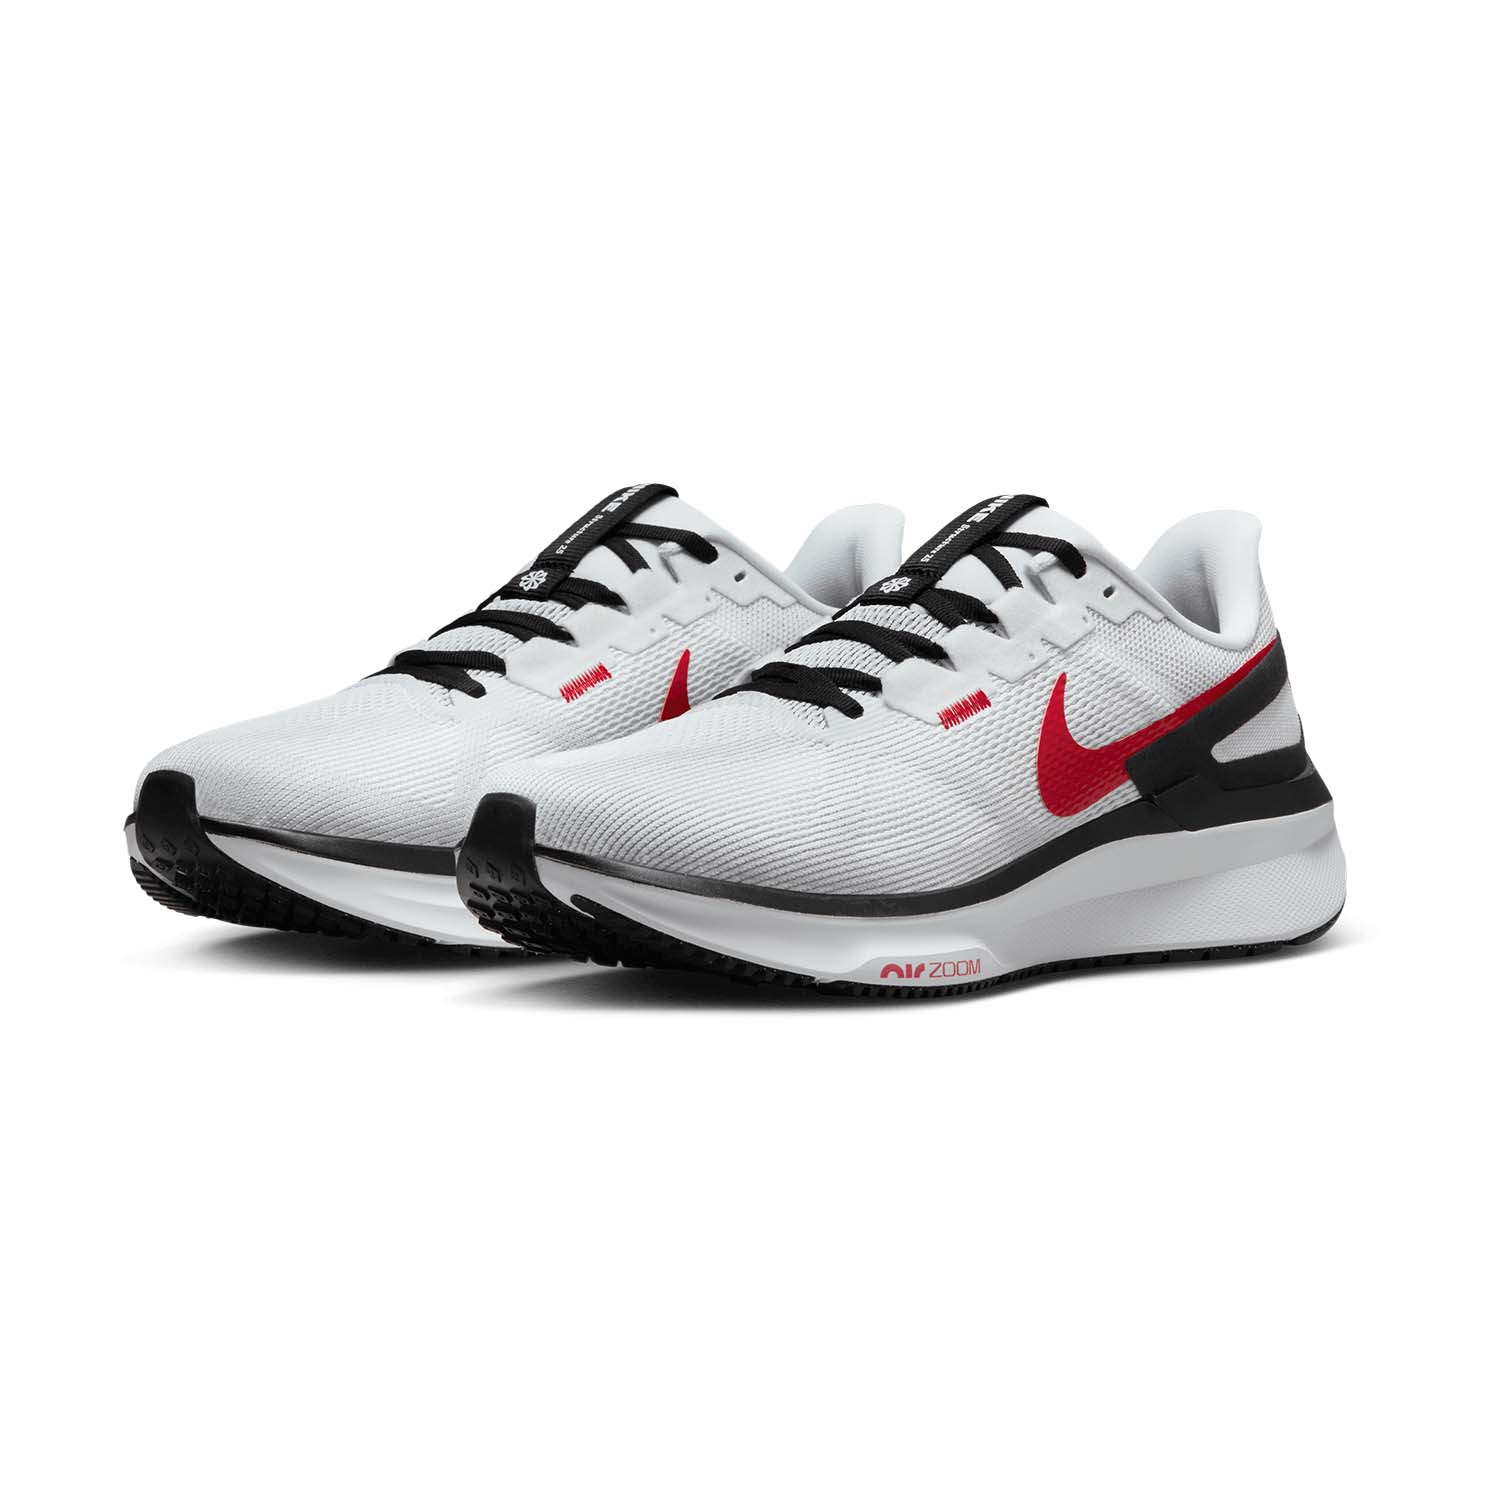 Nike Air Zoom Structure 25 - White/Fire Red/Black/Light Smoke Grey